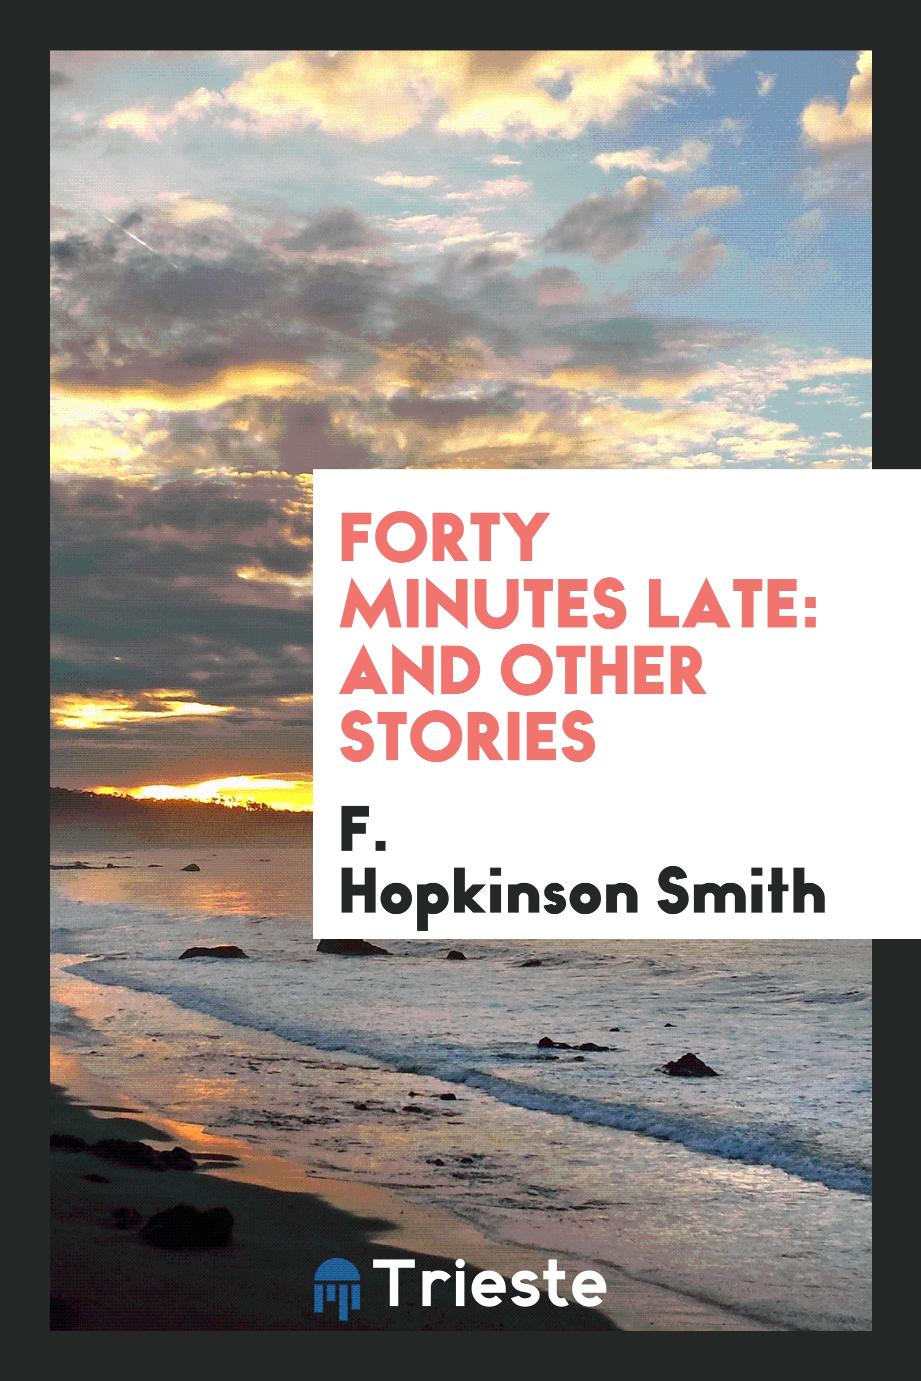 Forty minutes late: and other stories